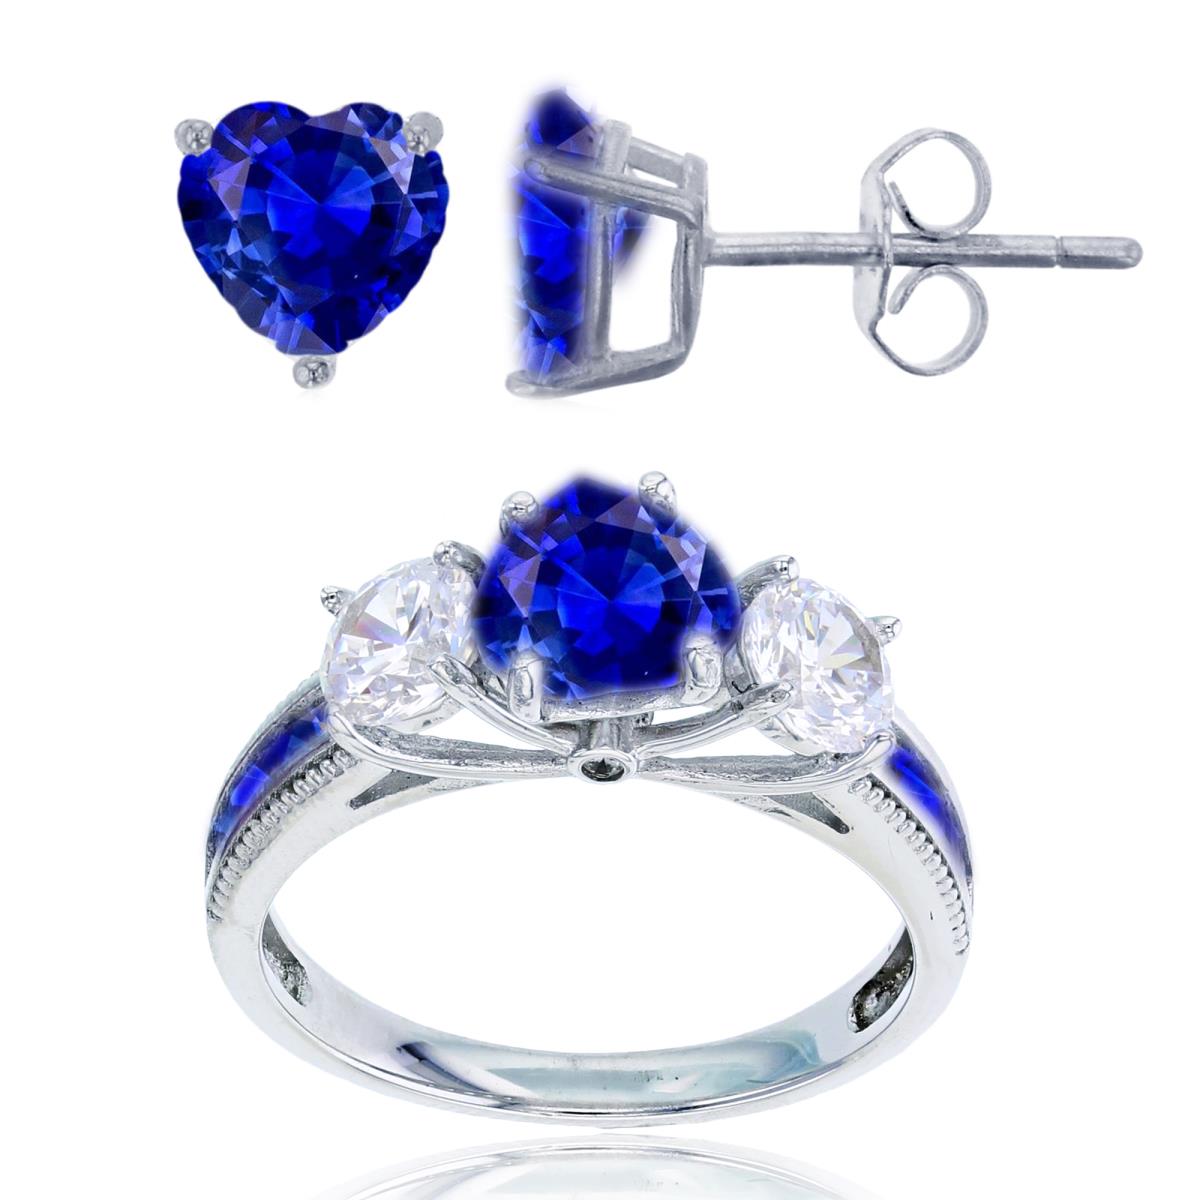 Sterling Silver Rhodium 3-Stone 7mm #113 Blue Hrt & 5mm Rd CZ Ring & 6mm Hrt Solitaire Stud Earring Set